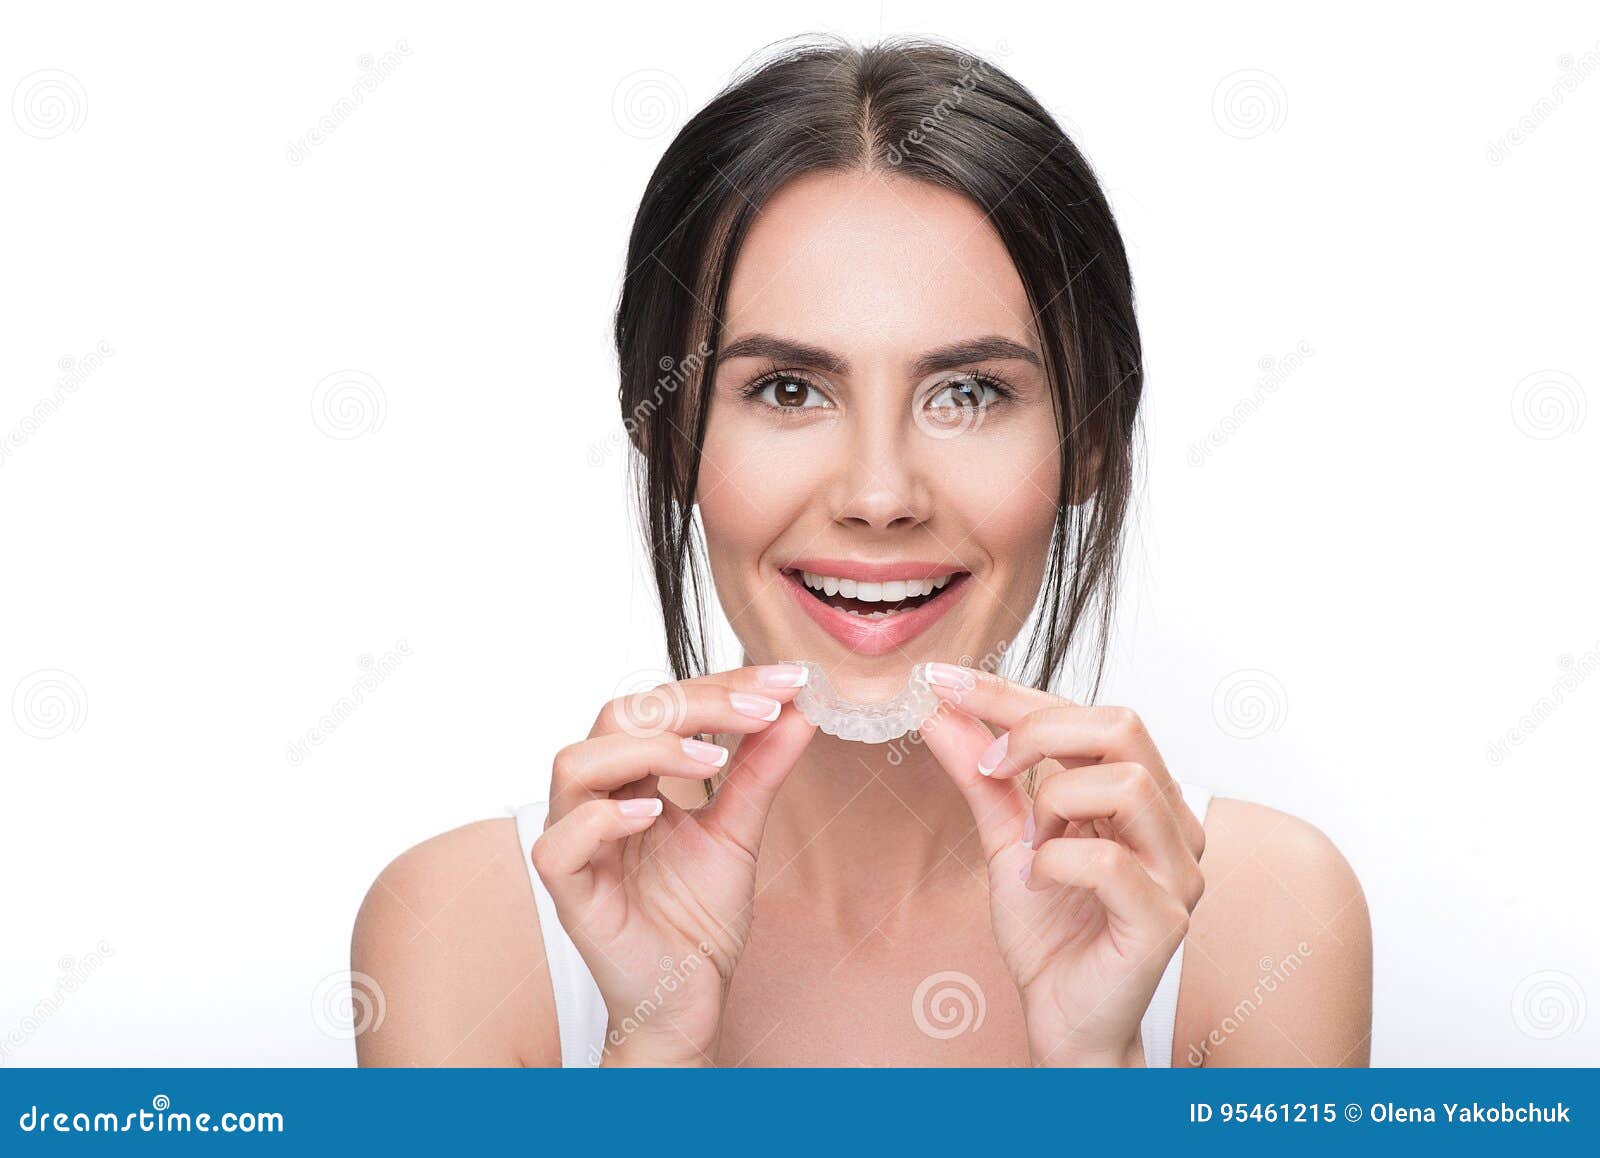 excited young woman holding clear aligner